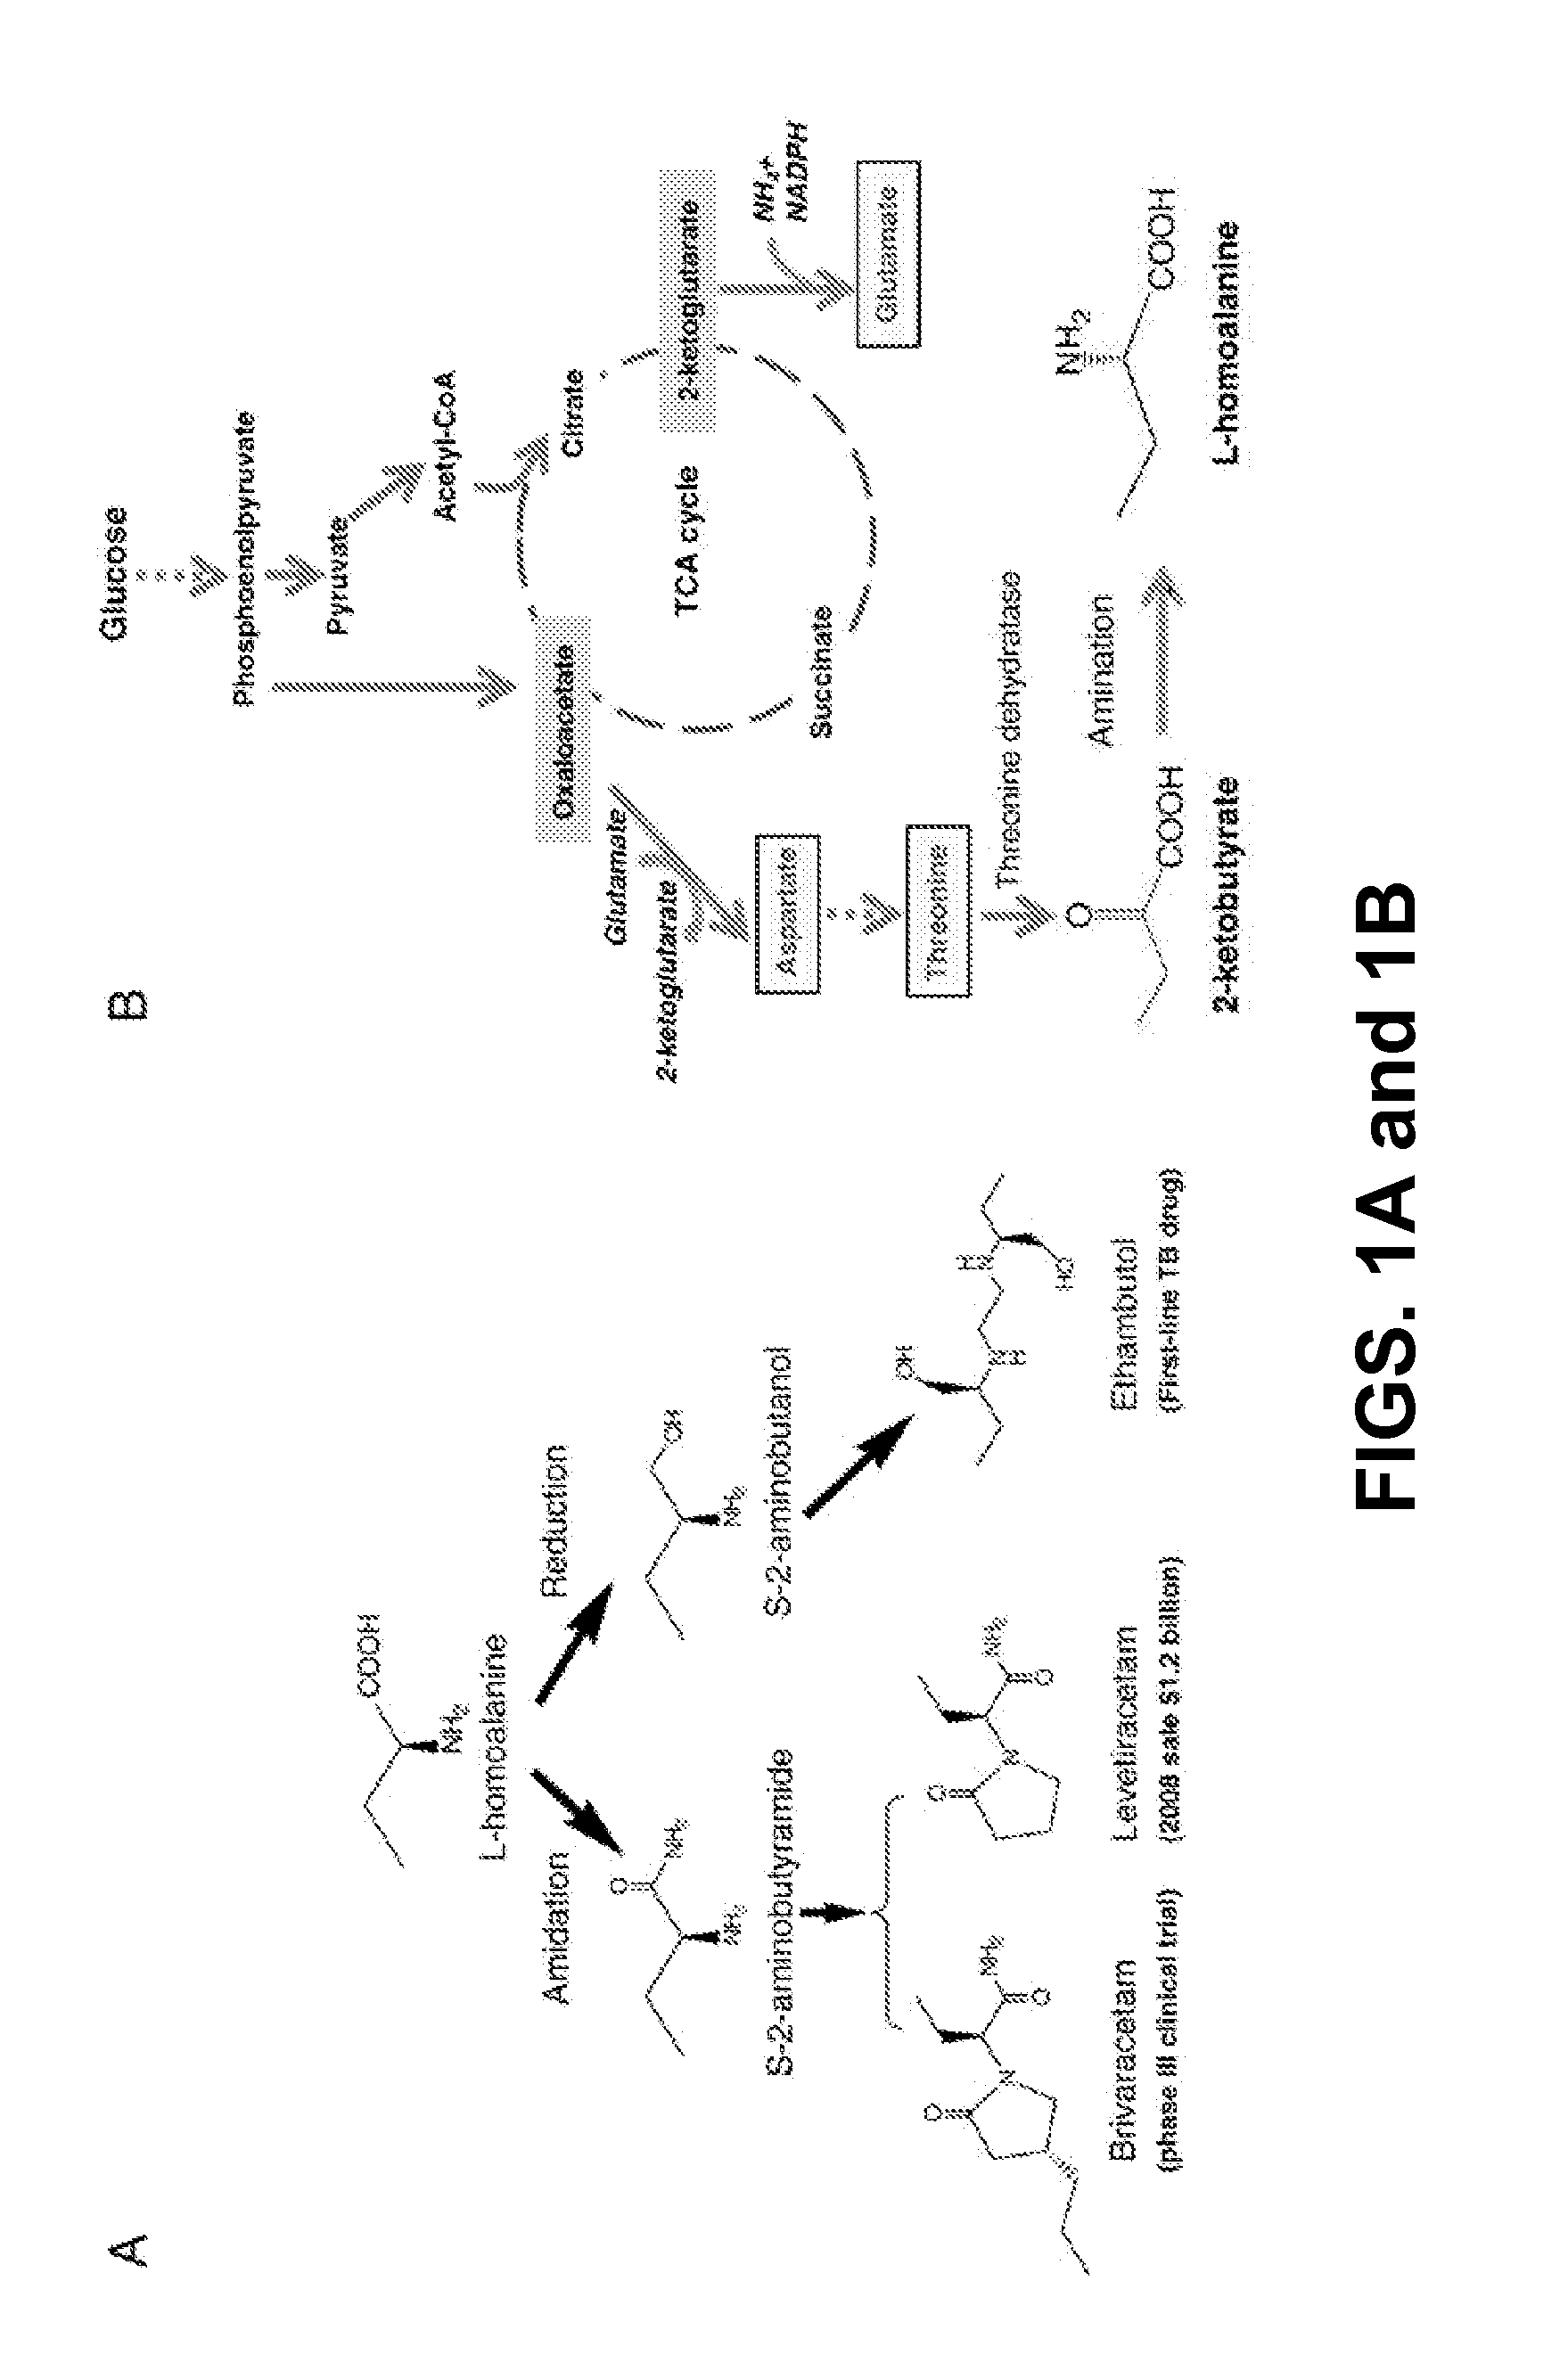 Compositions and methods for the production of l-homoalanine